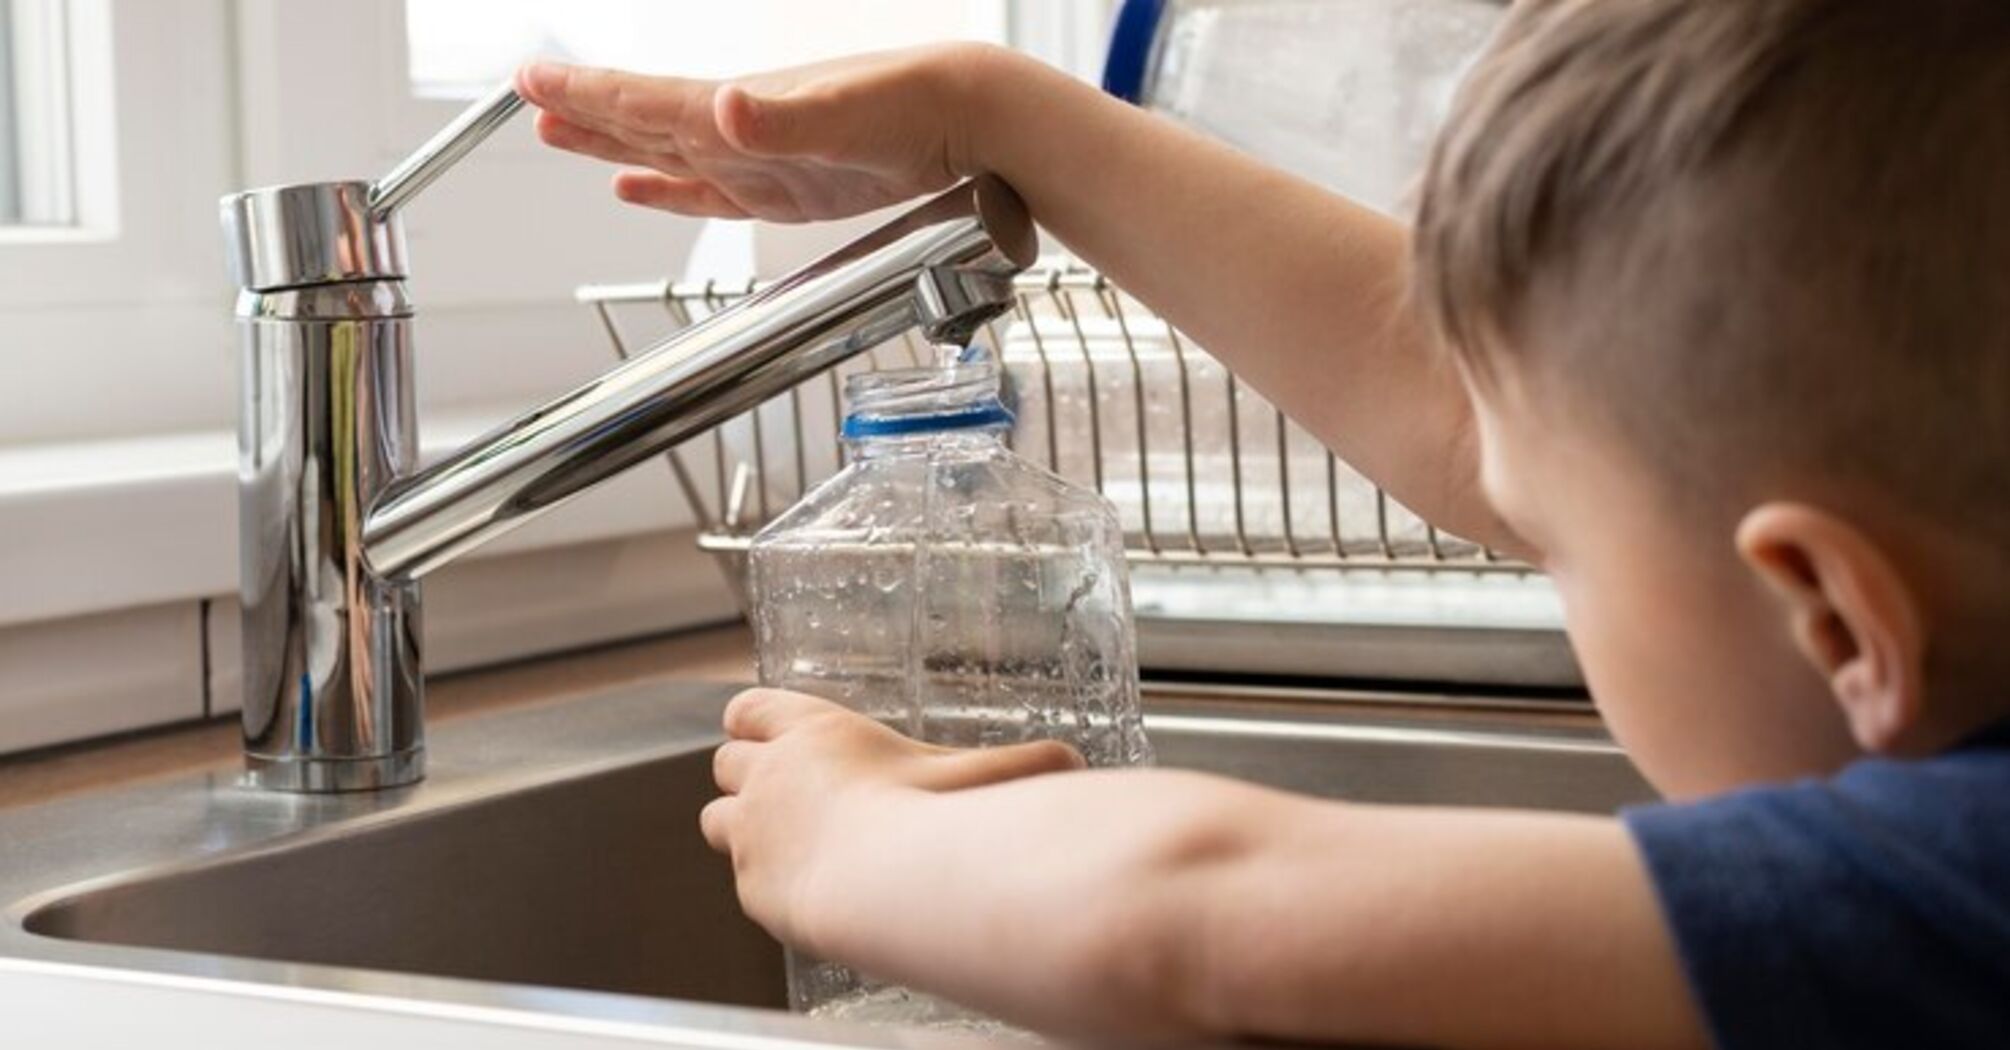 Where to avoid drinking tap water